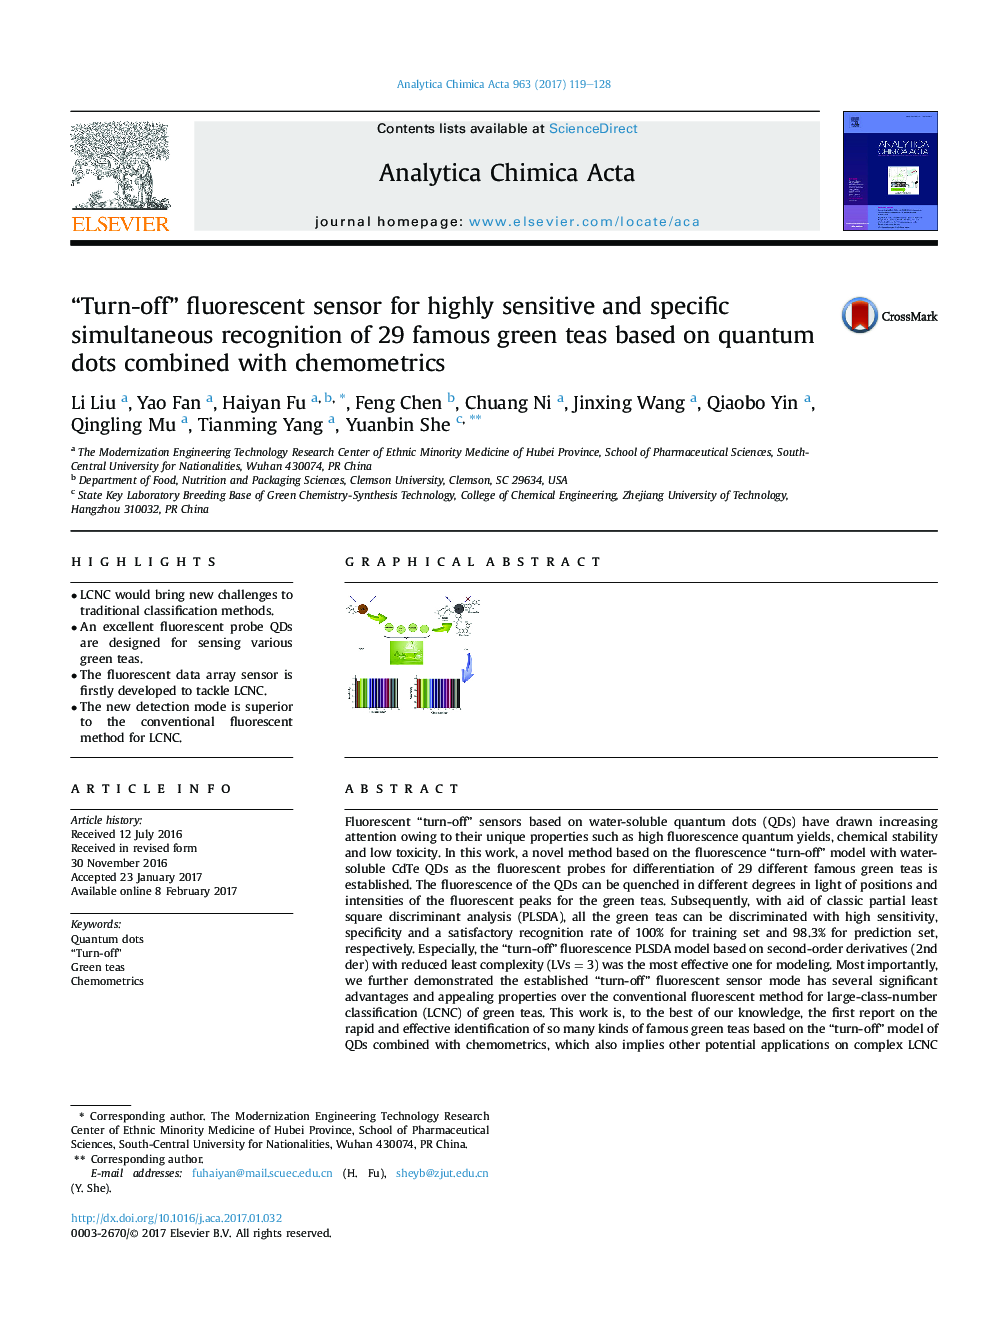 “Turn-off” fluorescent sensor for highly sensitive and specific simultaneous recognition of 29 famous green teas based on quantum dots combined with chemometrics